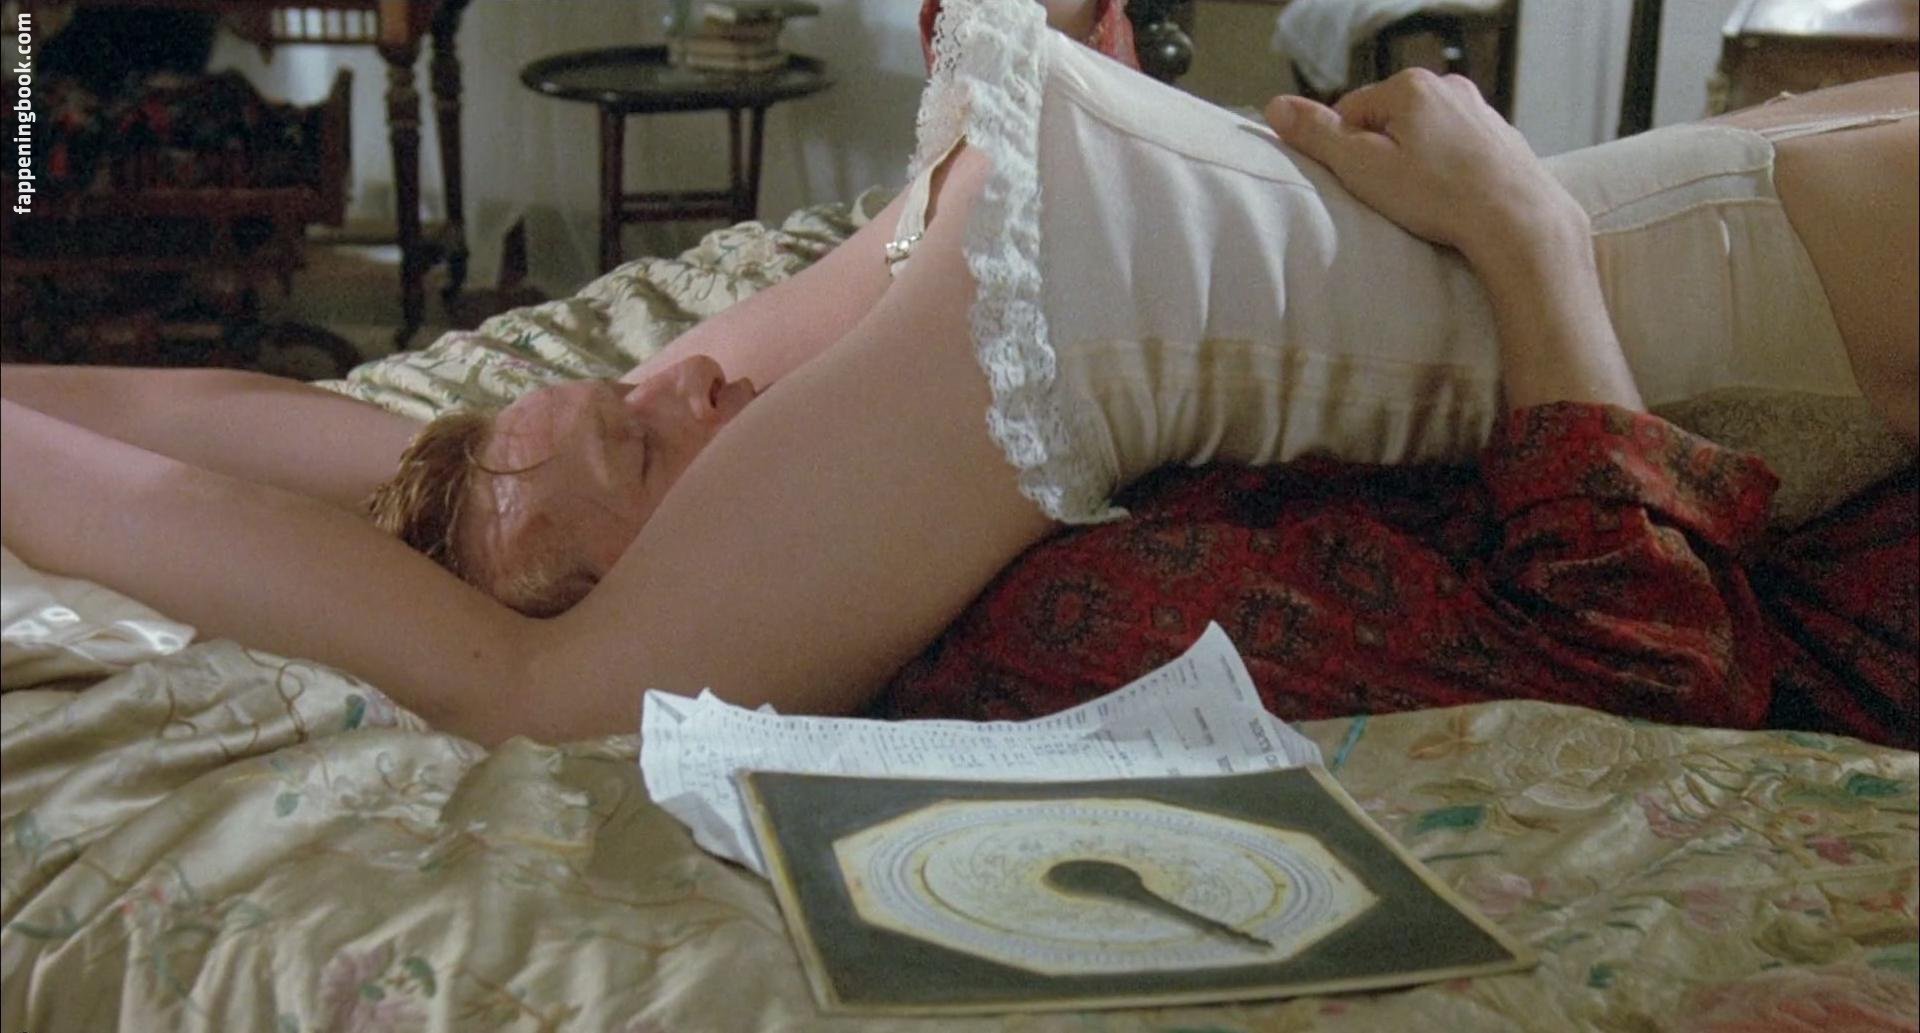 Theresa Russell Nude, The Fappening - Photo #525154 - FappeningBook.